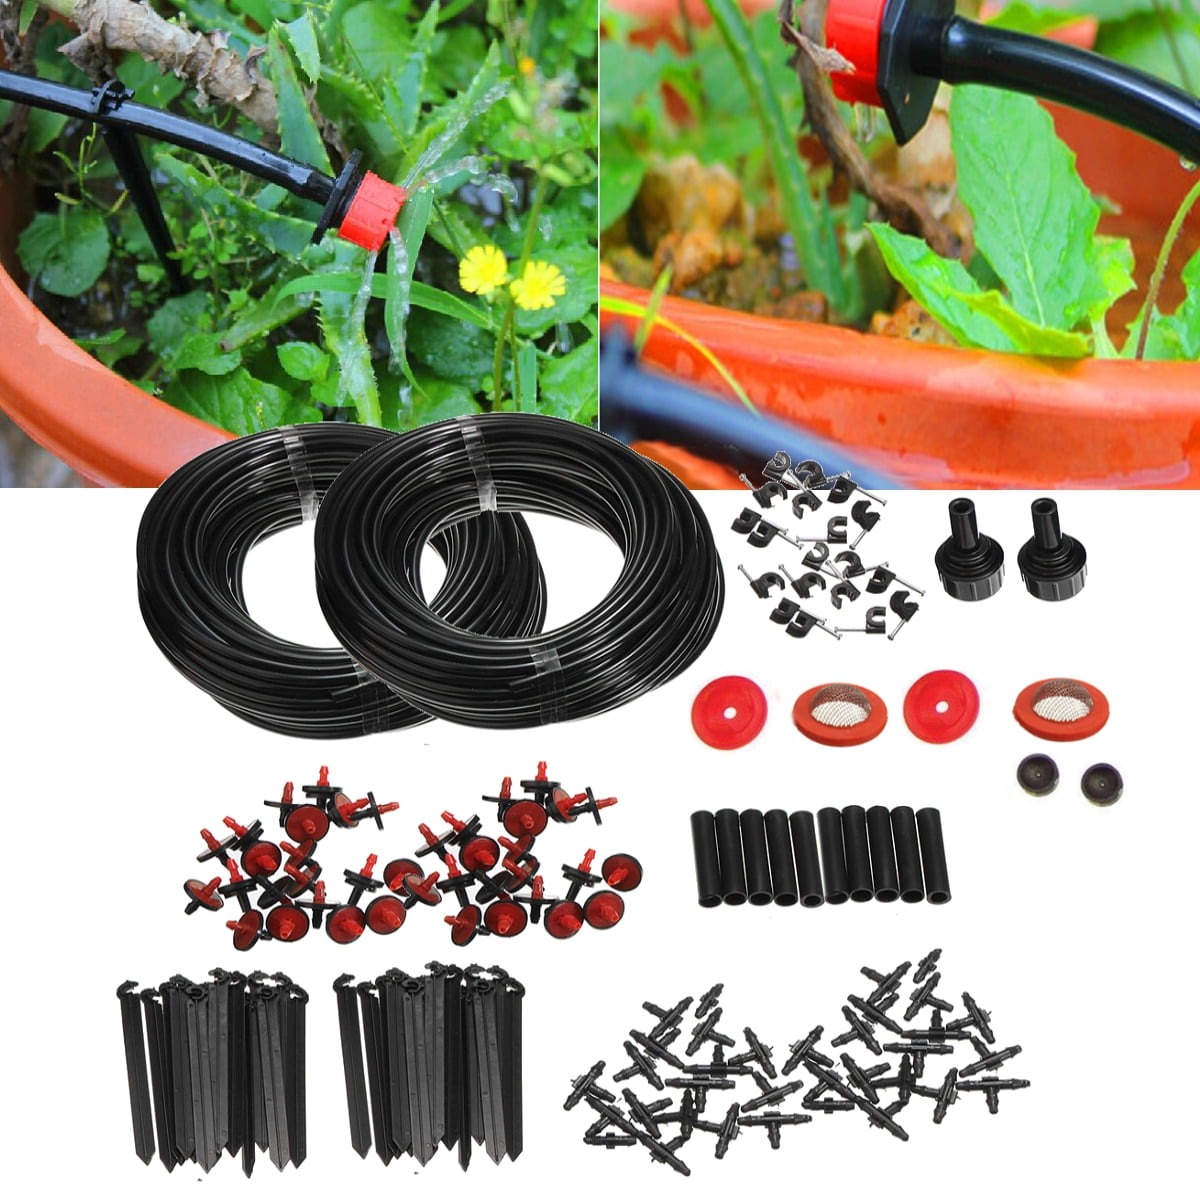 Self Watering Plants Timing Irrigation Hose Kits For Flower Bed Patio Garden 8F 